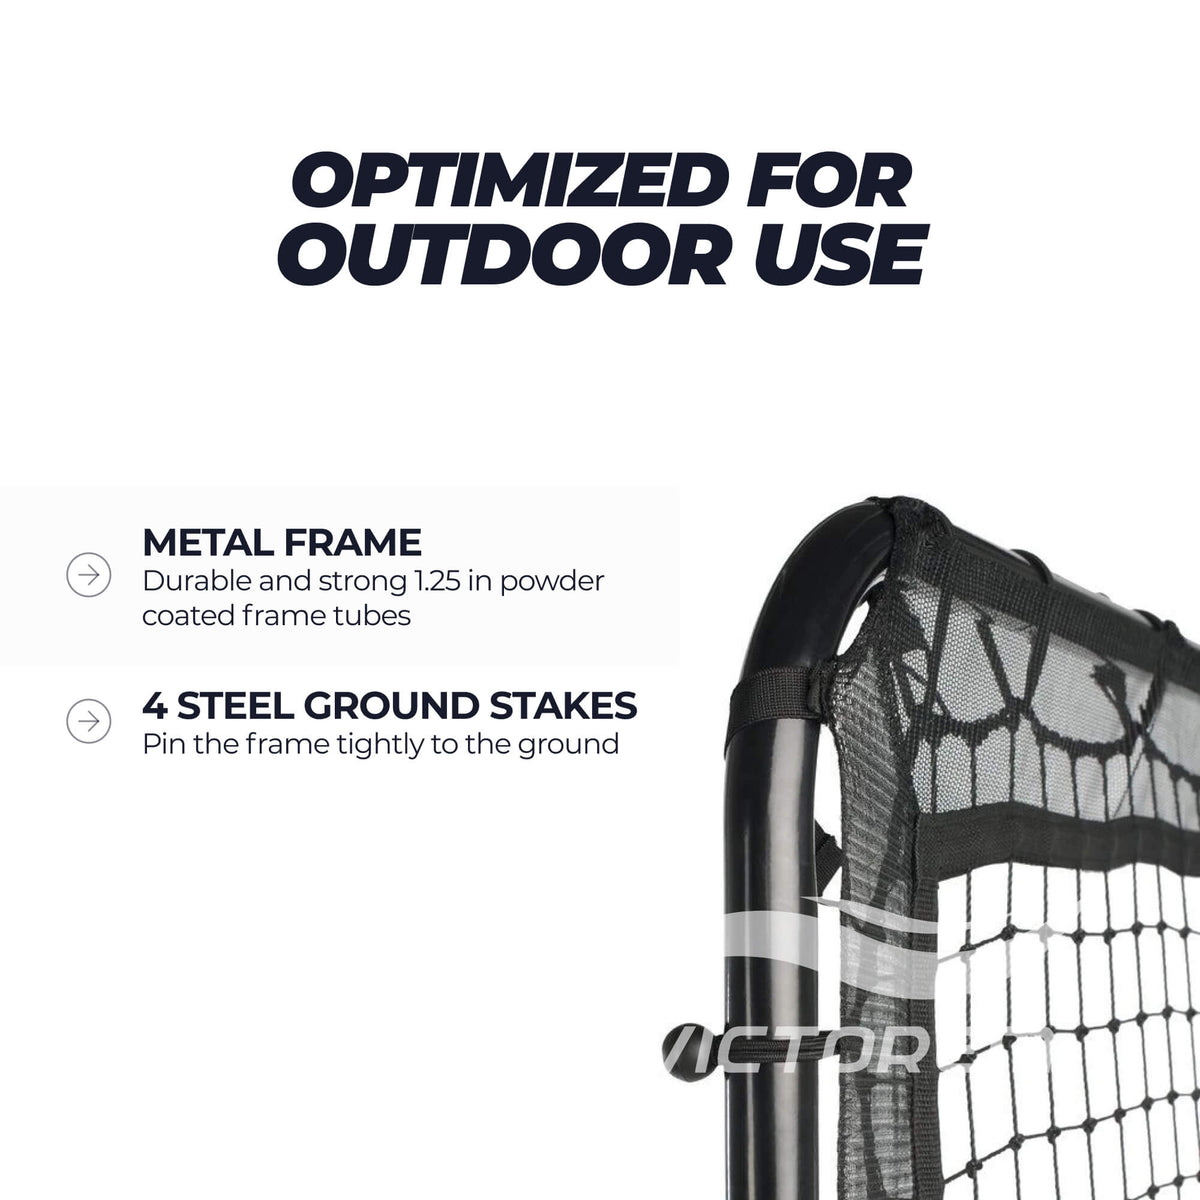 lacrosse rebounder for outdoor use